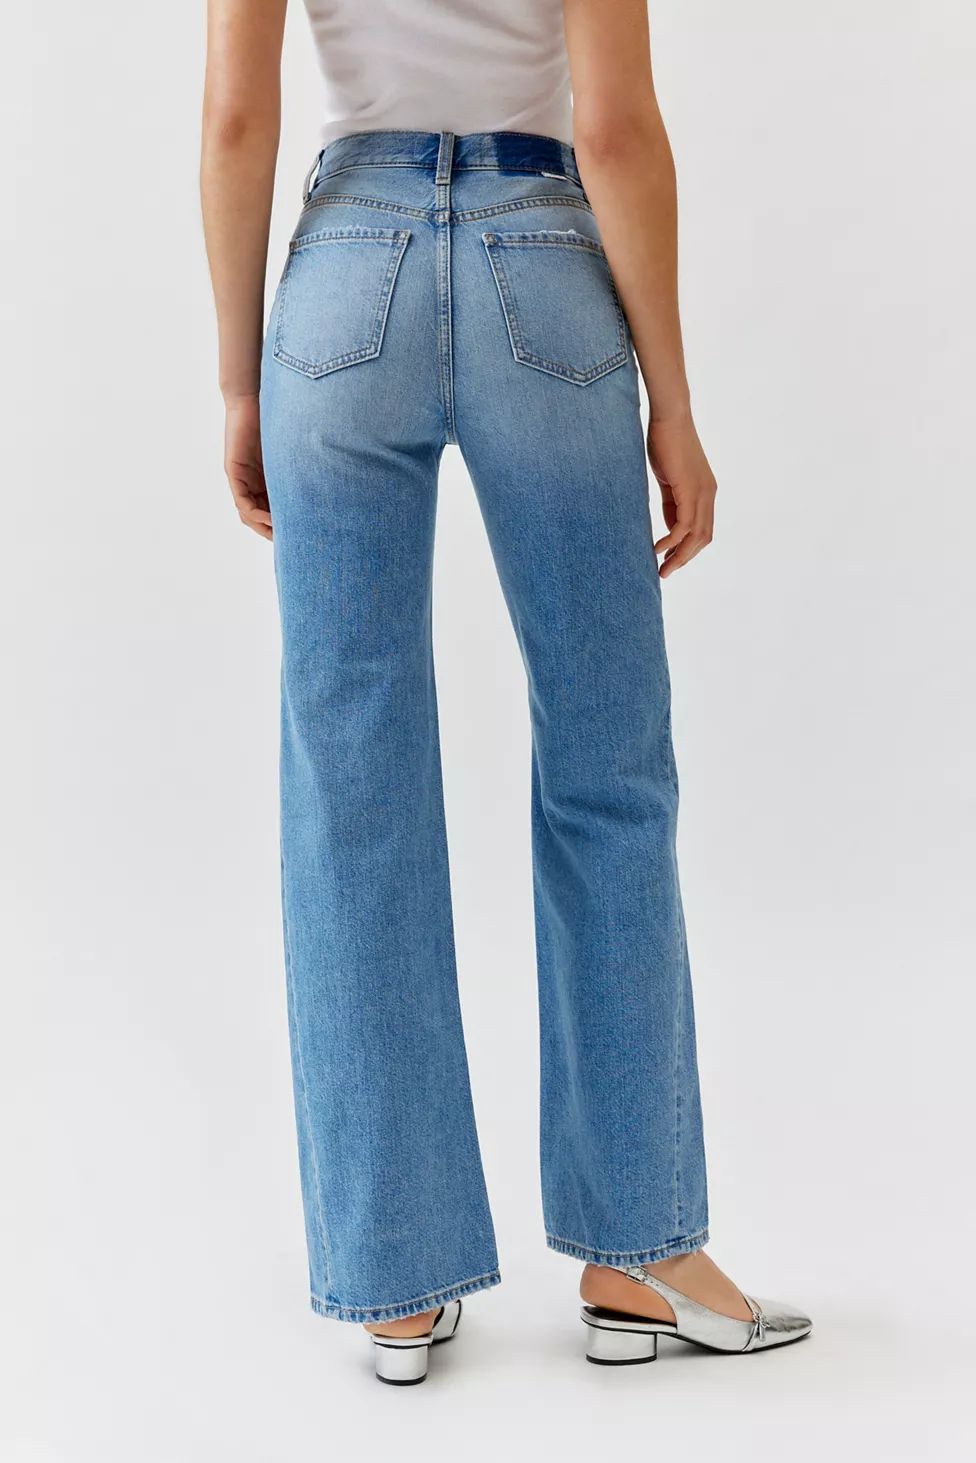 Daze Denim Far Out High-Waisted Jean | Urban Outfitters (US and RoW)